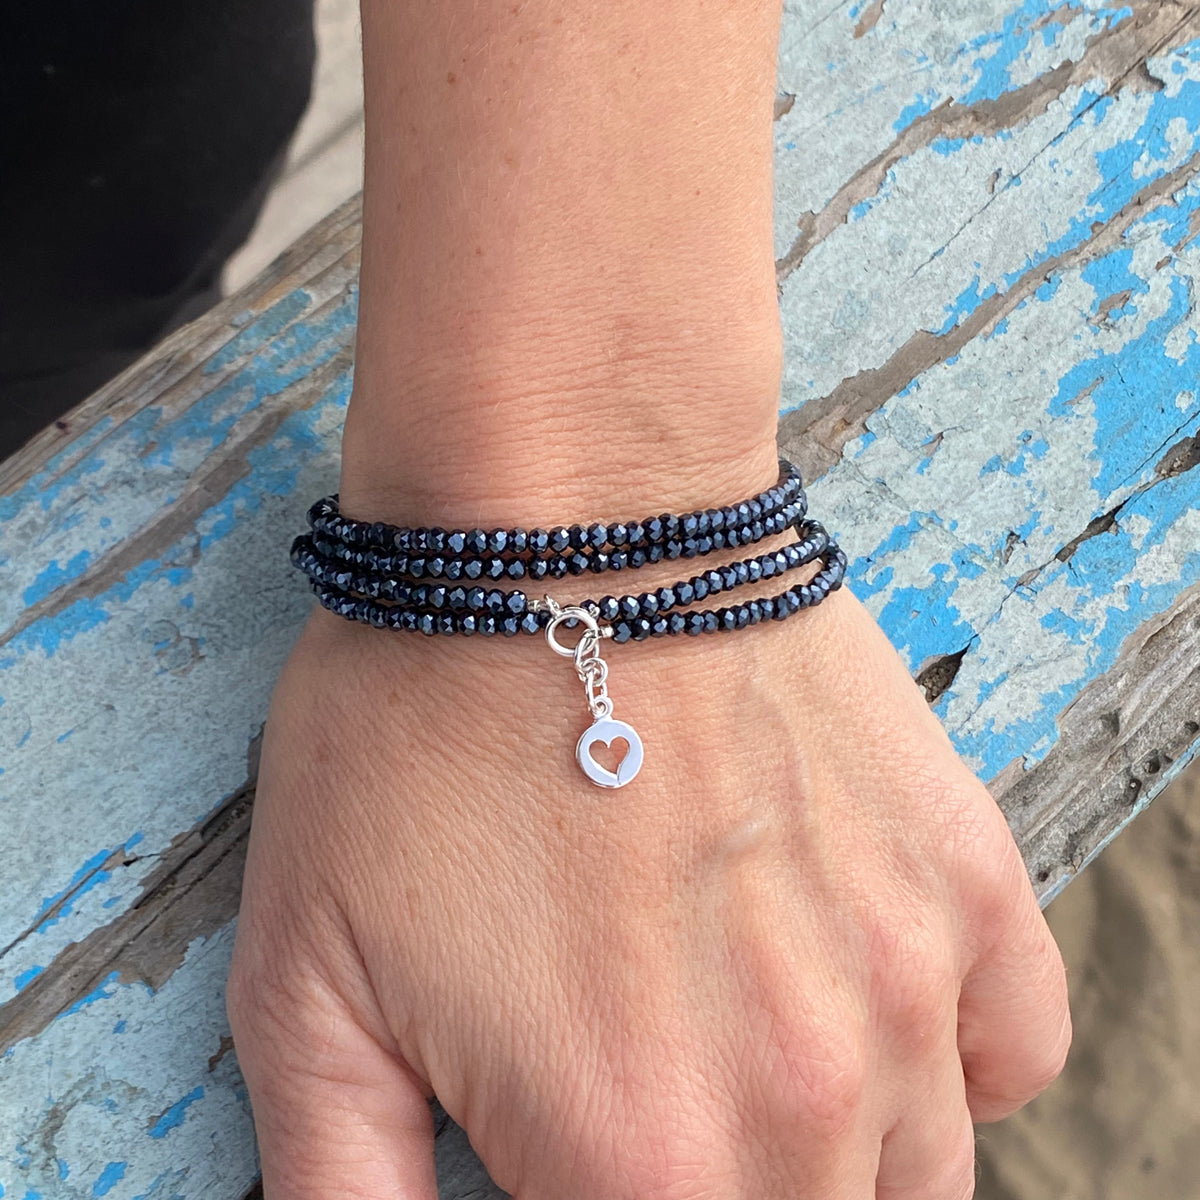 Wear this bracelet as a reminder that Love starts with Self Love. If you don't love yourself, you can not love others, said the Dalai Lama. 